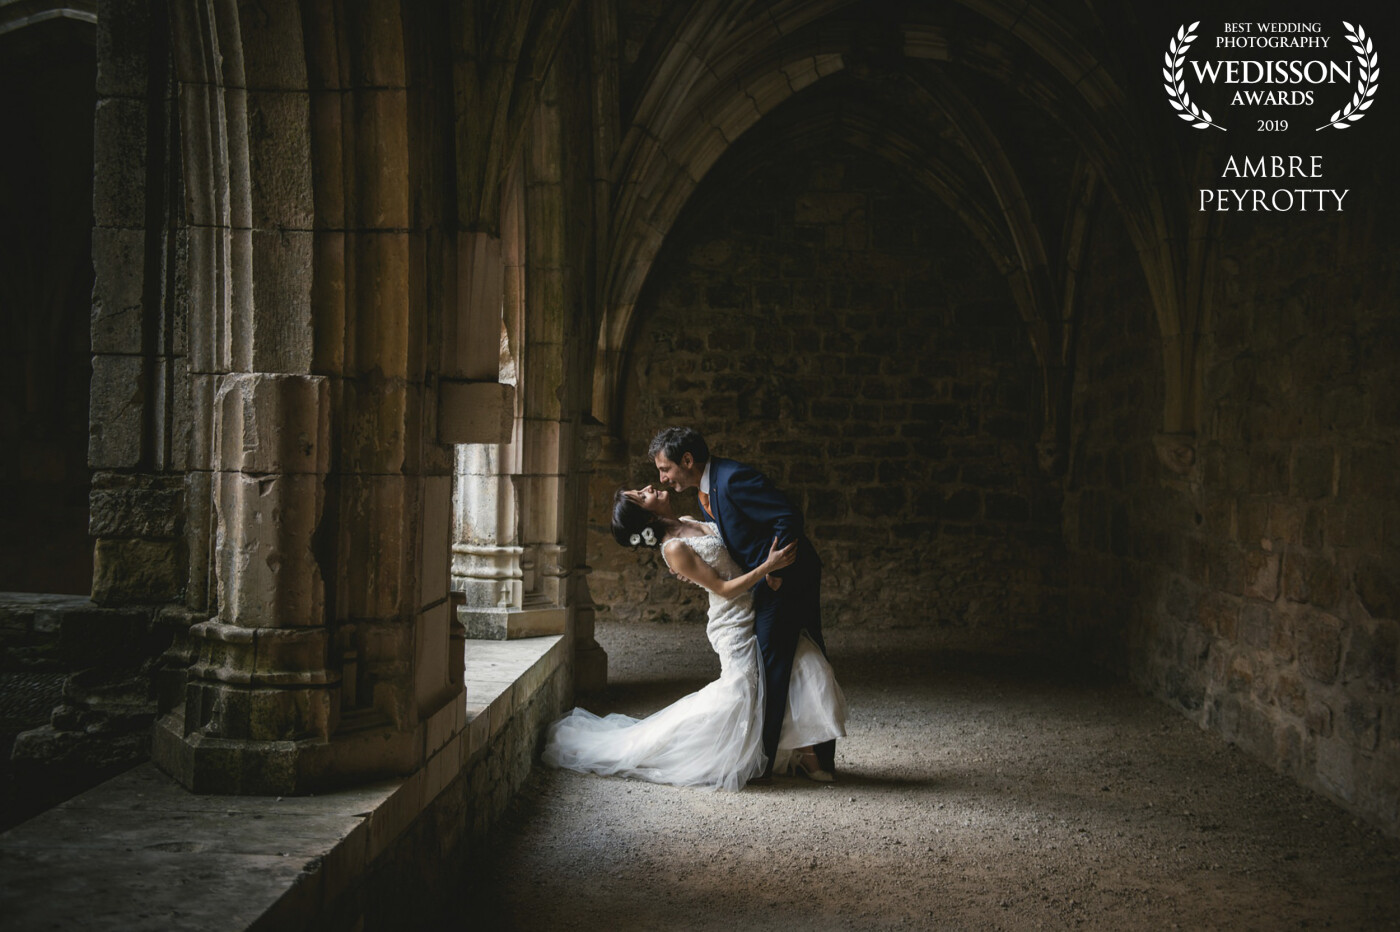 Emilie and Gregory organized their wedding in South West France, and it was all kinds of amazing. The places there are absolutely stunning and I was so happy when I found this pocket of light in this old priory!